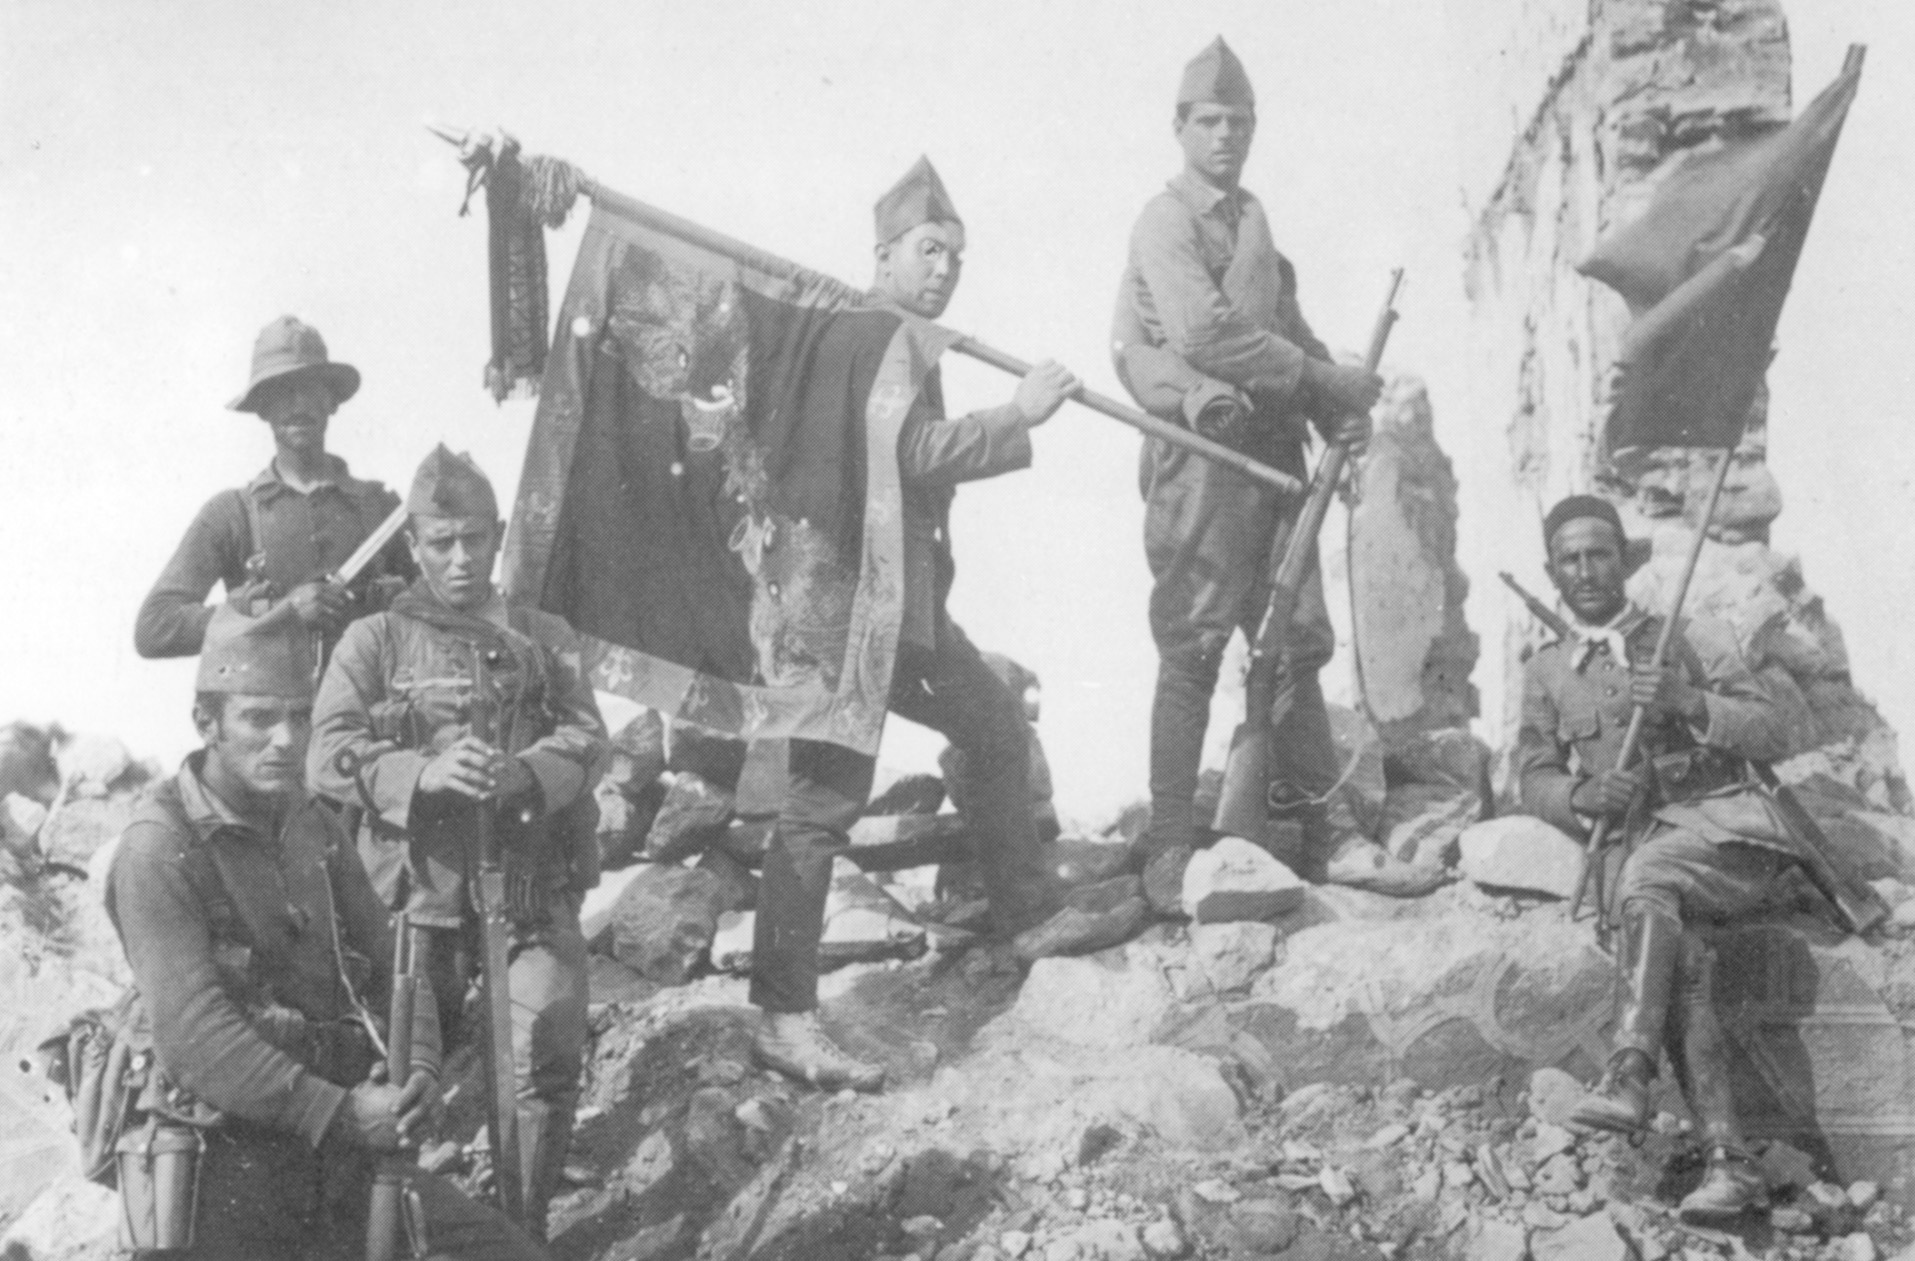 Armed with M93 Mauser rifles, men of the Spanish Foreign Legion stand after conquering a redoubt in the Moroccan mountains; they were fighting native chieftains.